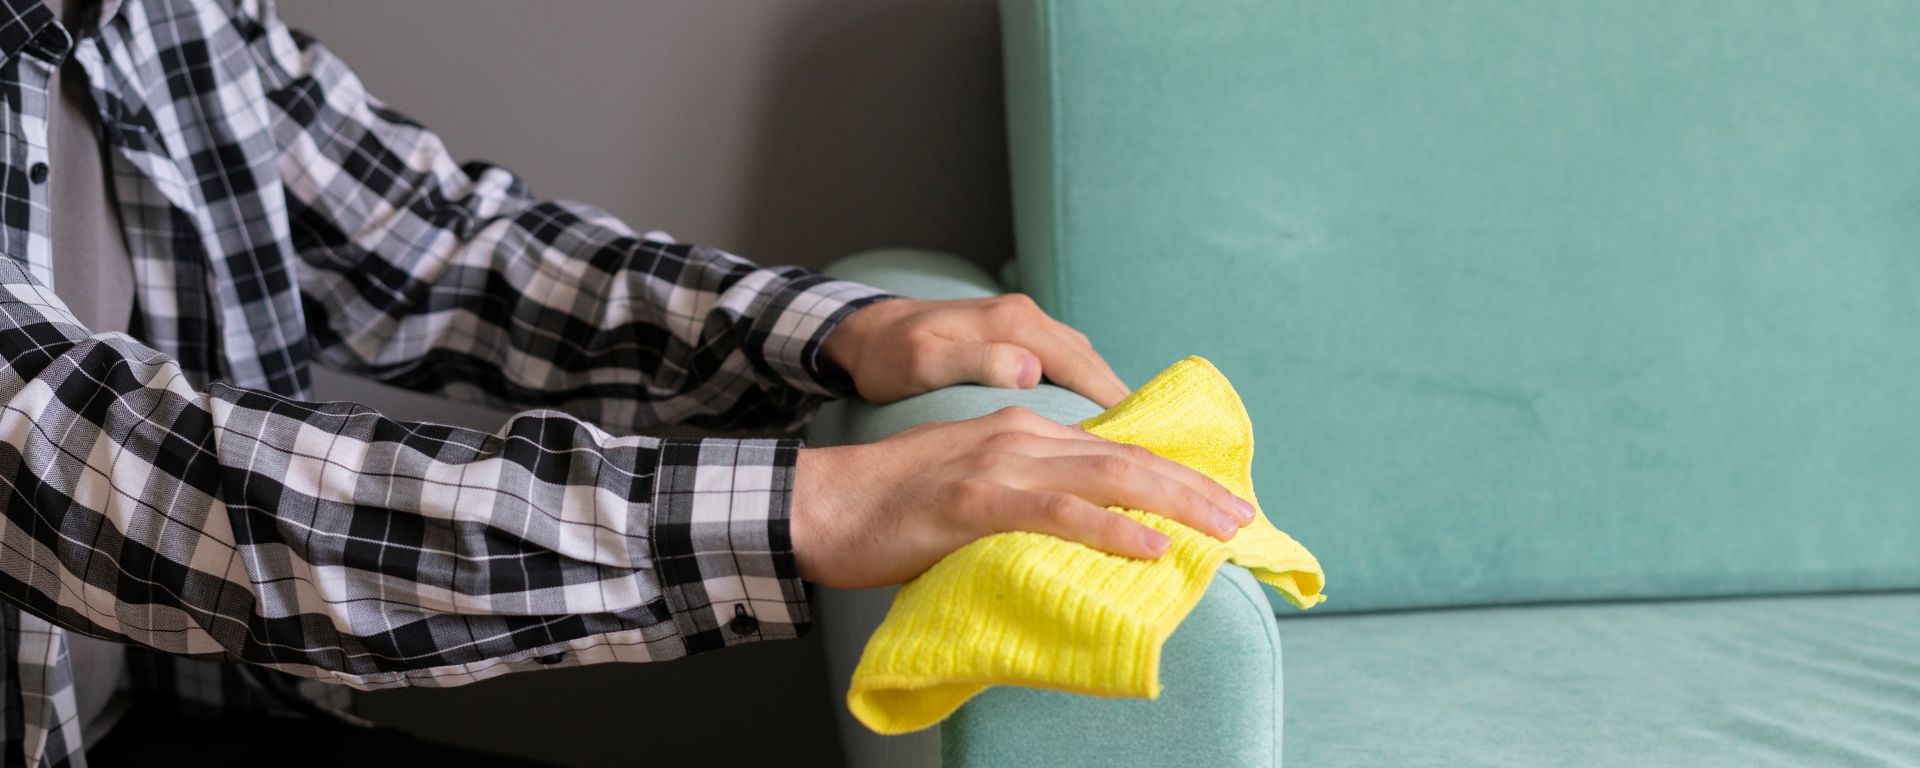 How To Clean Dog Pee On Sofa